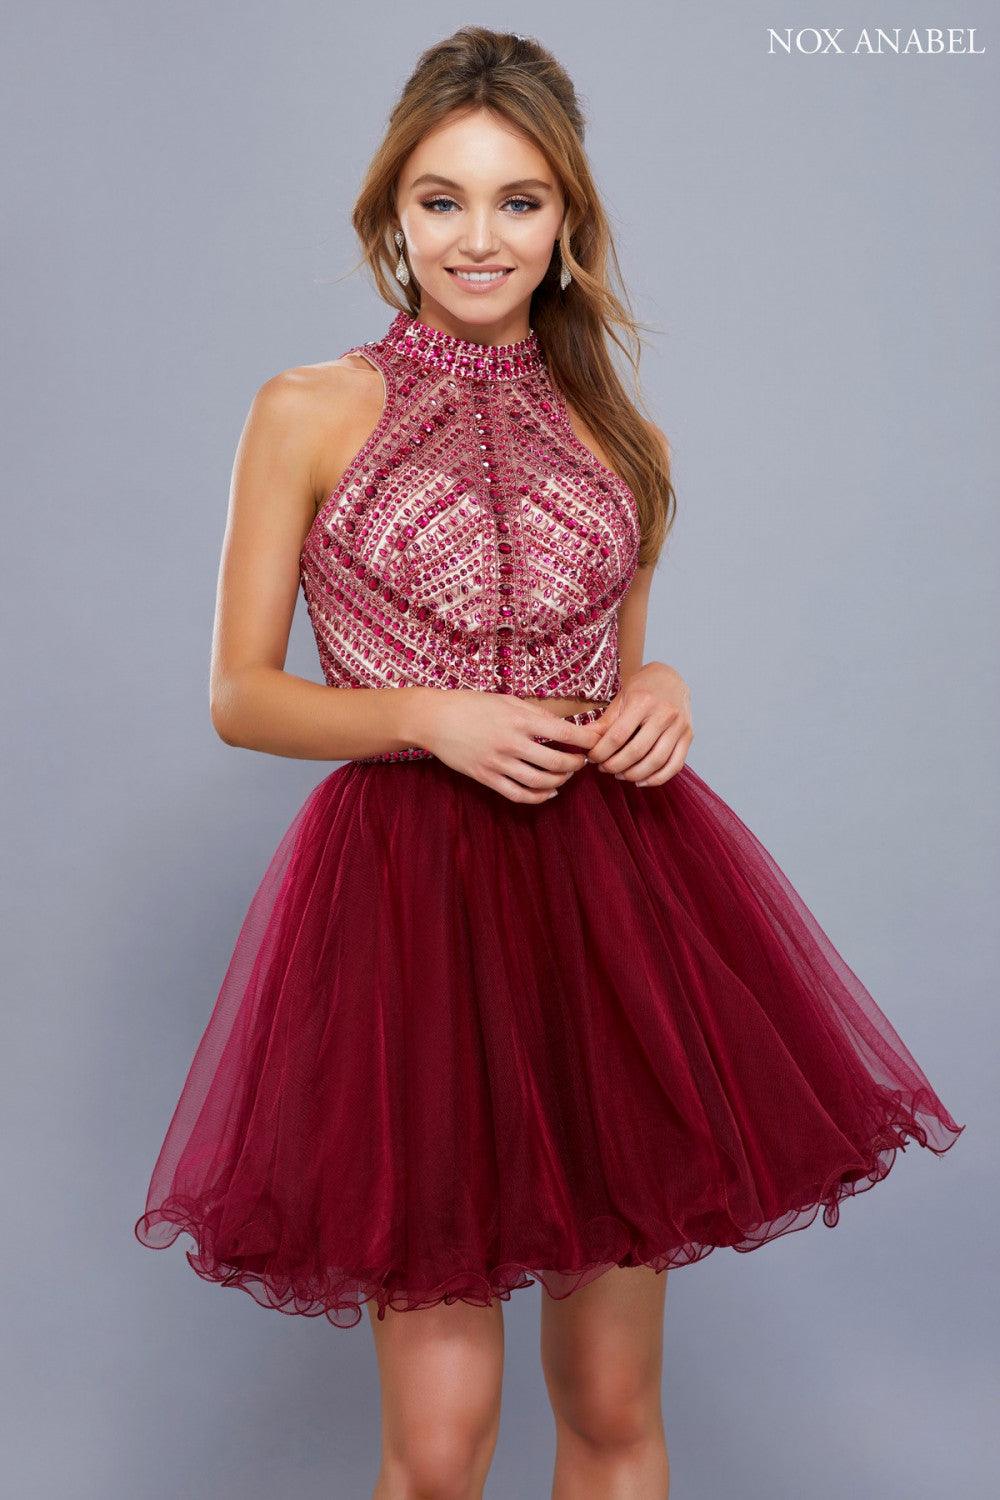 Sparkly Short Two Piece Prom Homecoming Dress - The Dress Outlet Nox Anabel